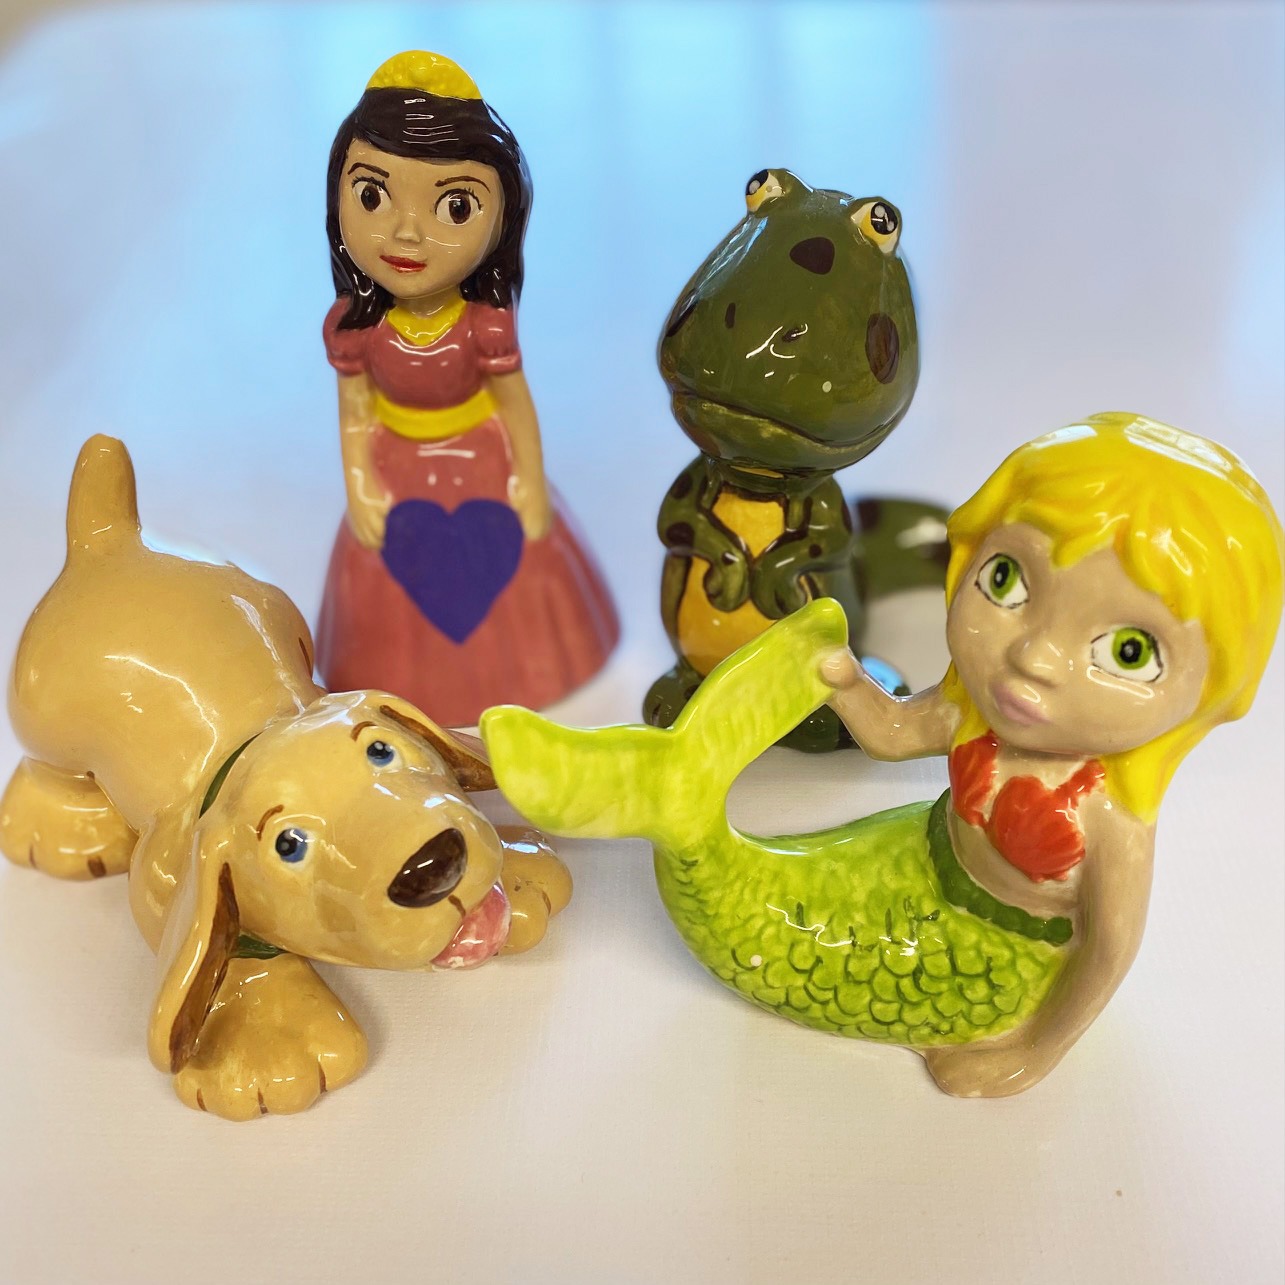 Discover our collection of four unique ceramic figures, each beautifully crafted. Find a charming princess, an adorable frog, a playful dog and an enchanting mermaid all arranged on a clean white background. Perfect for enhancing any living space with personality and character!